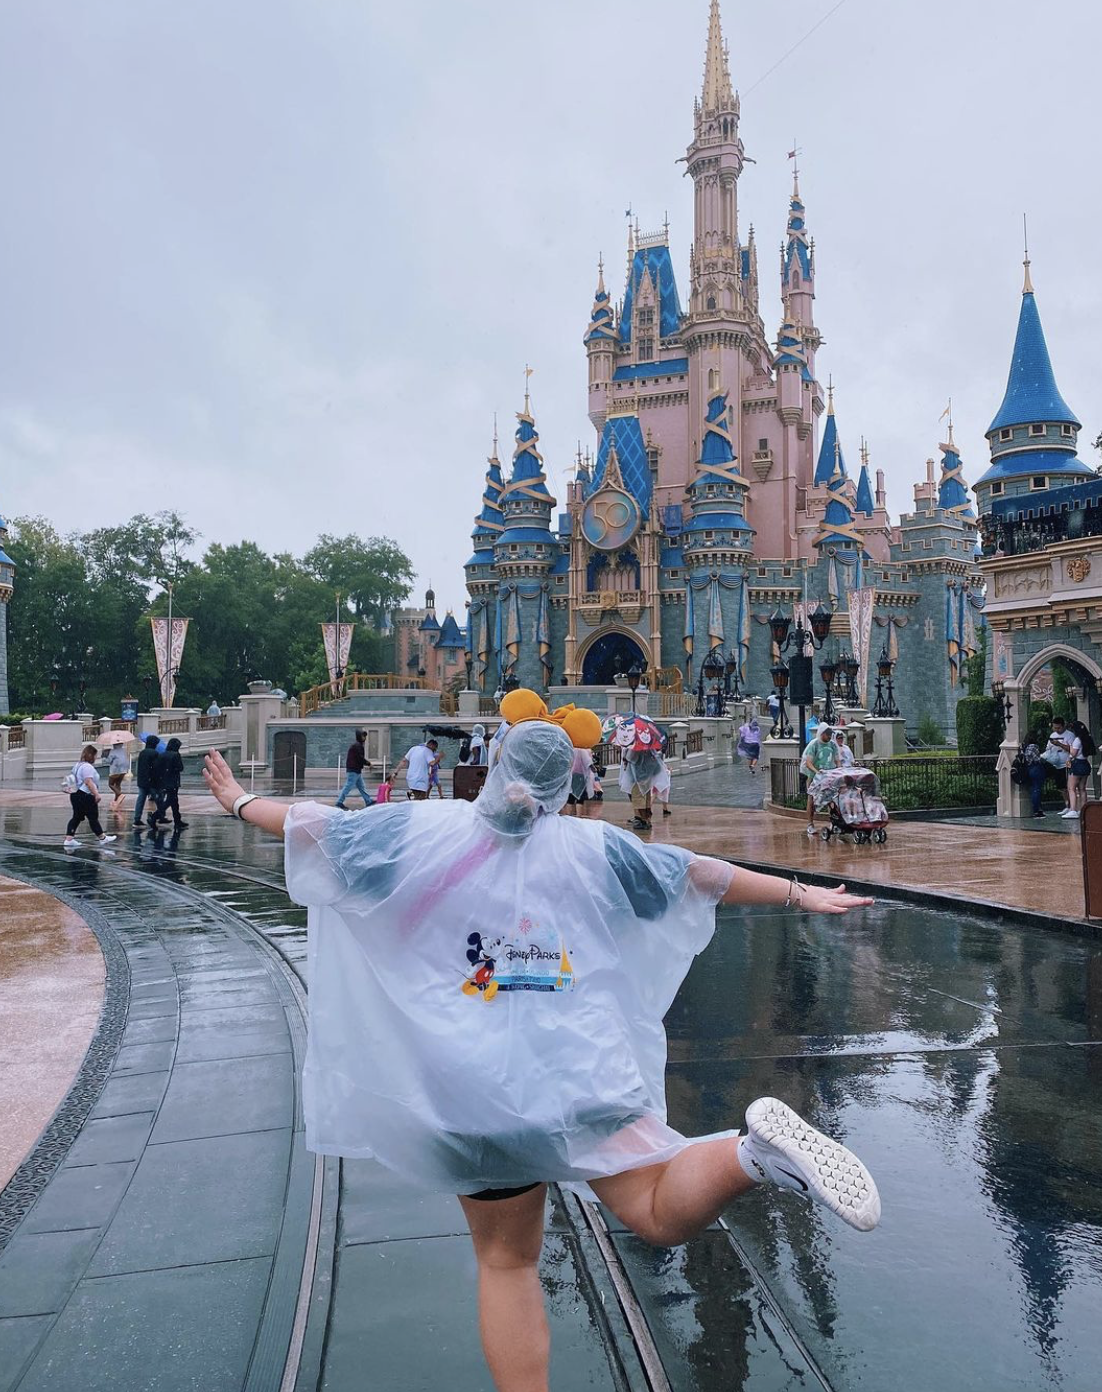 A light-skinned person runs forward, arms flung out to their sides, with one leg kicked back. They are wearing a clear rain poncho with the Disney World logo on the back and using a pair of yellow Mickey Mouse ears to hold the hood to their head. In front of them, the street leading to Cinderella's Castle is glistening in the rain.